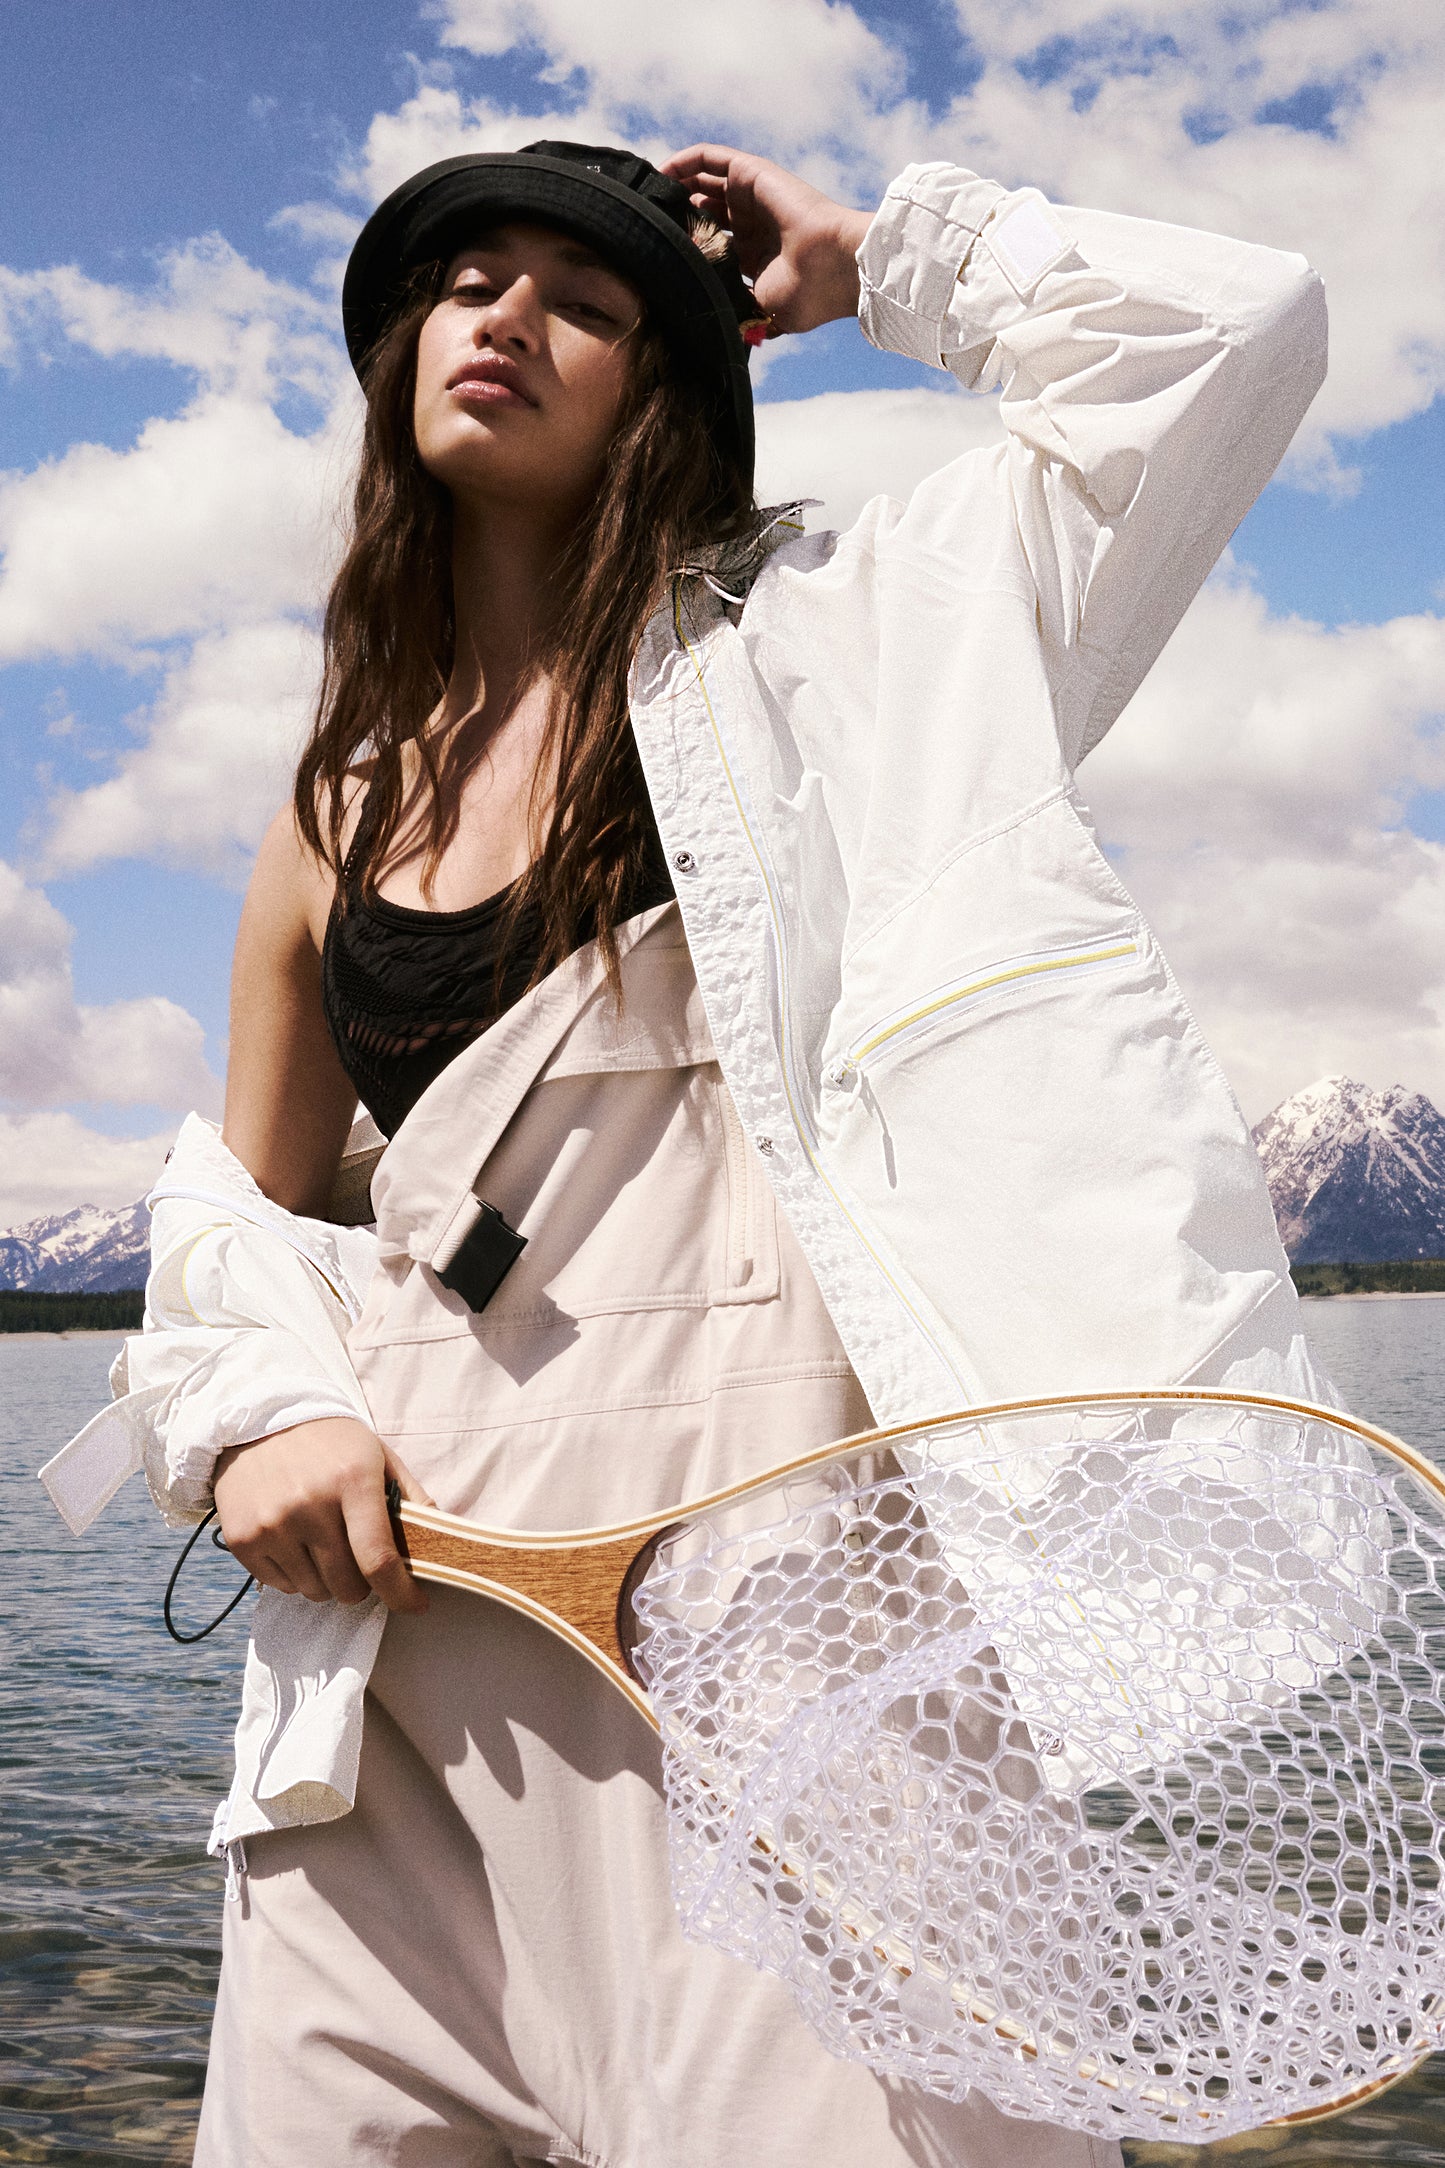 A woman wearing a Singin in the Rain Jacket by Free People Movement and holding a fishing net stands by a lake, adjusting her black hat, with snowy mountains in the background.